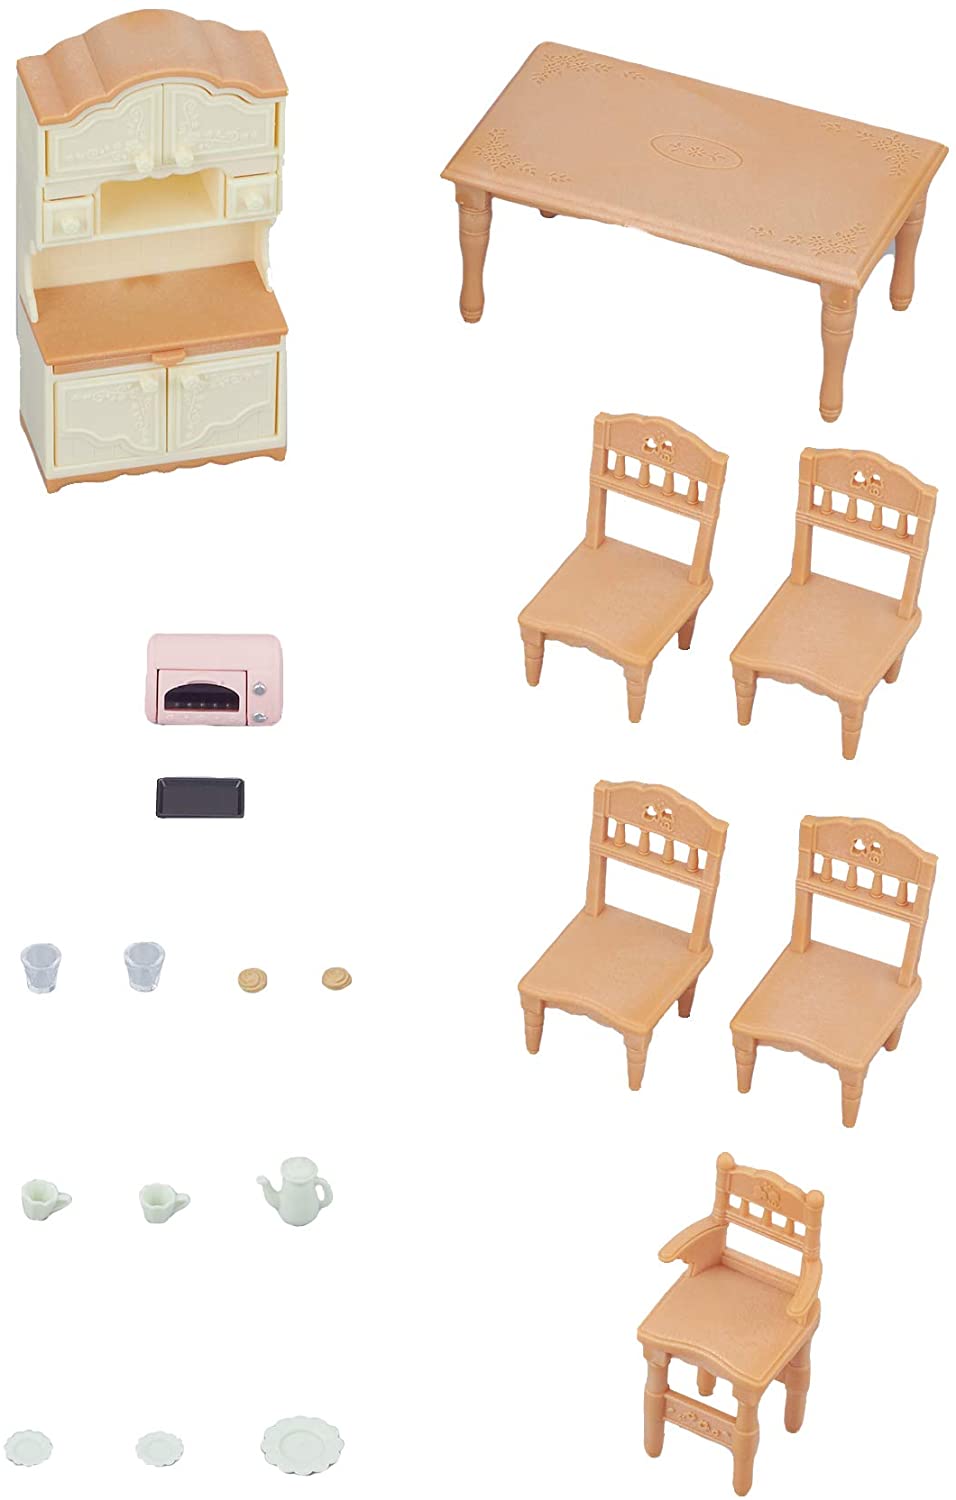 Calico Critters - Dining Room Set